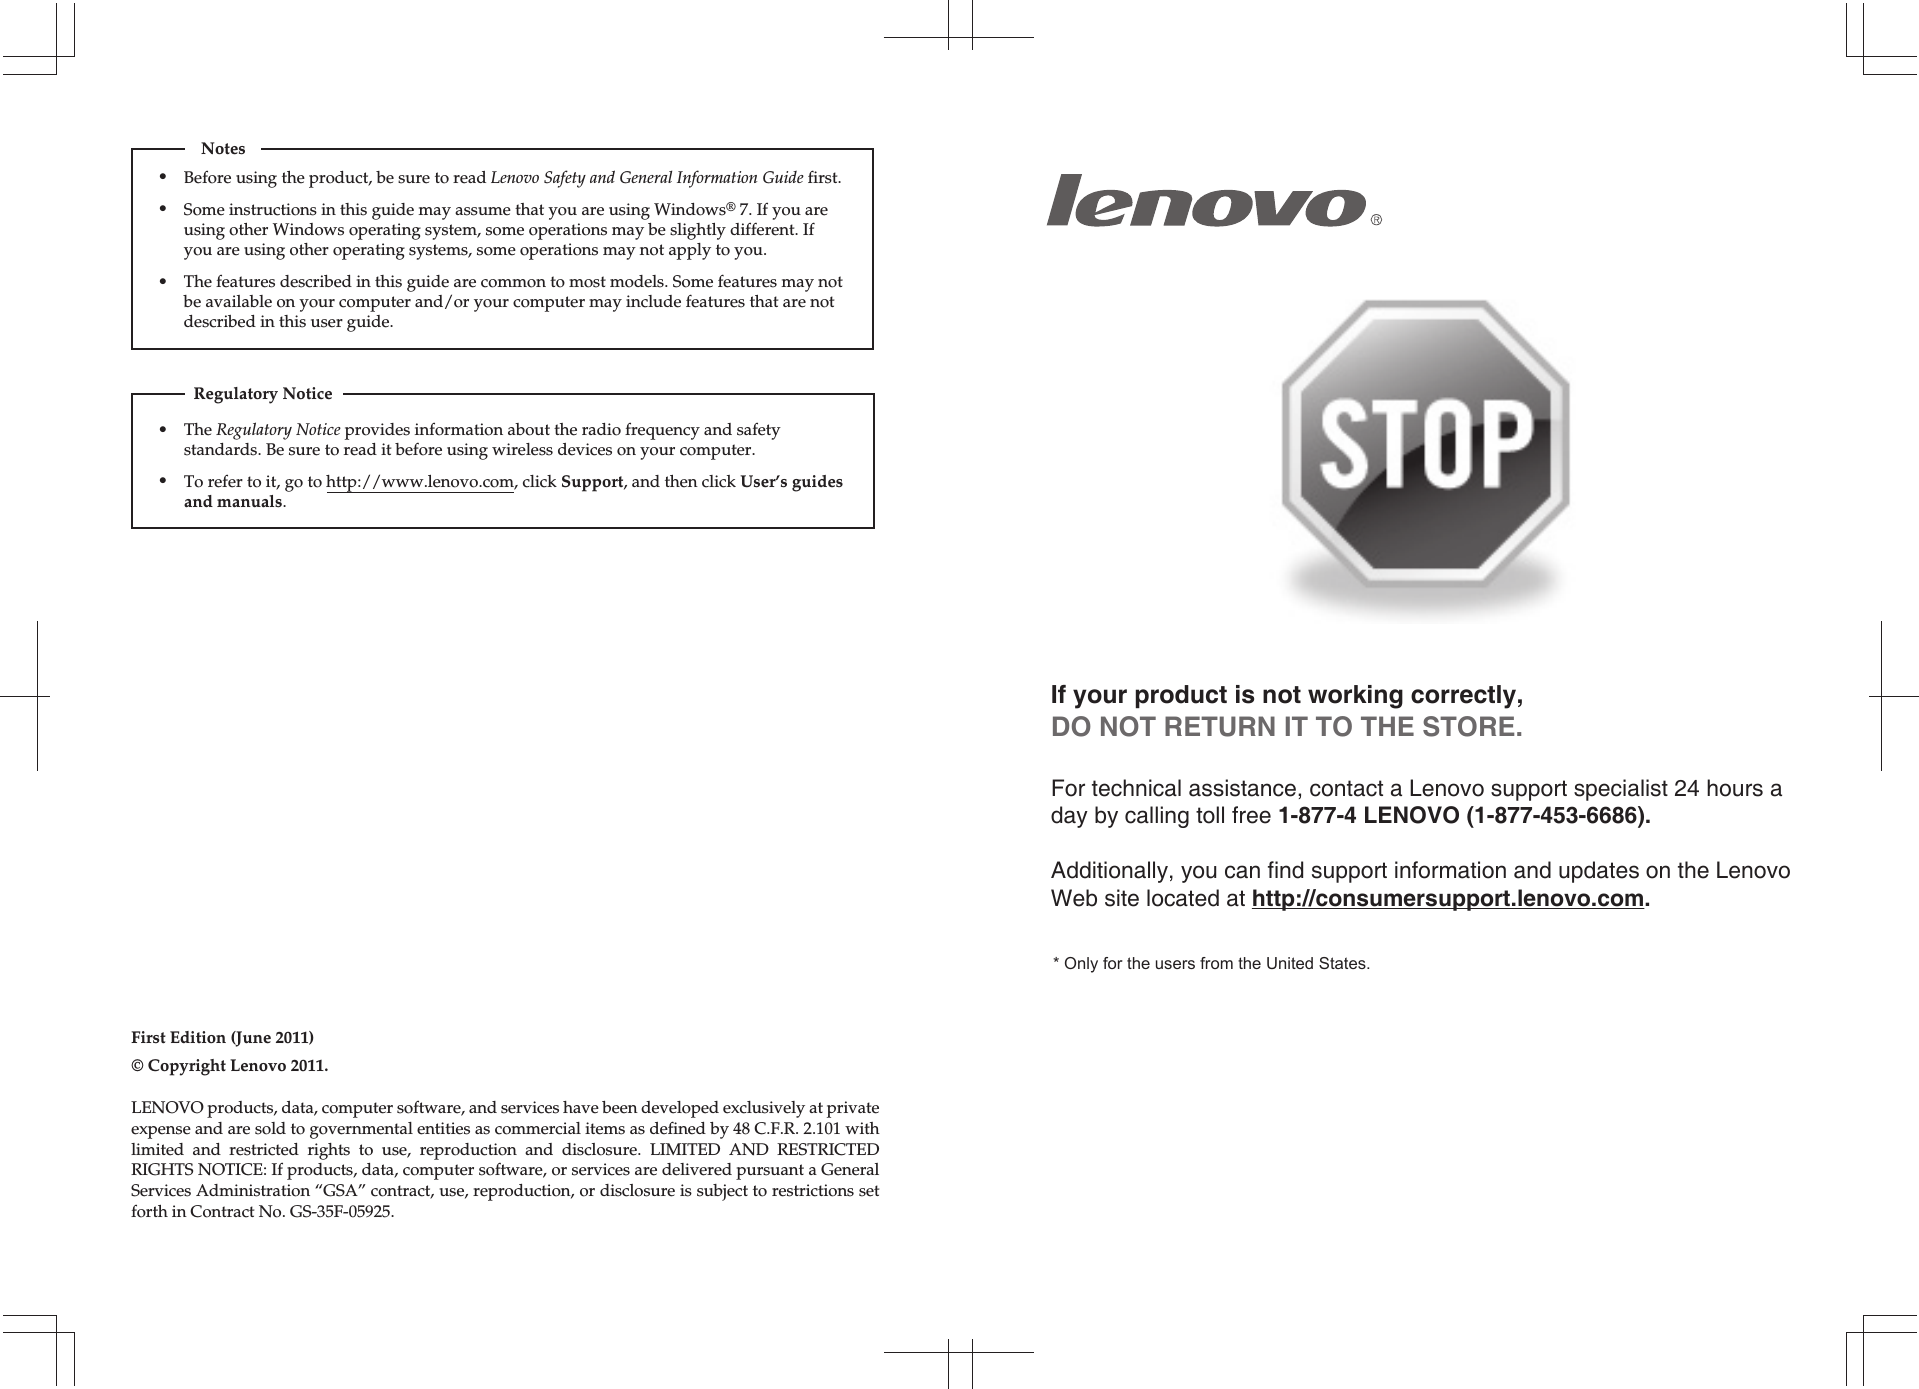 If your product is not working correctly, DO NOT RETURN IT TO THE STORE.For technical assistance, contact a Lenovo support specialist 24 hours a day by calling toll free 1-877-4 LENOVO (1-877-453-6686).   Additionally, you can find support information and updates on the Lenovo Web site located at http://consumersupport.lenovo.com.* Only for the users from the United States.The Regulatory Notice provides information about the radio frequency and safety standards. Be sure to read it before using wireless devices on your computer.To refer to it, go to http://www.lenovo.com, click Support, and then click User’s guides and manuals.Regulatory NoticeFirst Edition (June 2011)© Copyright Lenovo 2011. Before using the product, be sure to read Lenovo Safety and General Information Guide first.The features described in this guide are common to most models. Some features may not be available on your computer and/or your computer may include features that are not described in this user guide.Some instructions in this guide may assume that you are using Windows® 7. If you are using other Windows operating system, some operations may be slightly different. If you are using other operating systems, some operations may not apply to you.LENOVO products, data, computer software, and services have been developed exclusively at private expense and are sold to governmental entities as commercial items as defined by 48 C.F.R. 2.101 with limited and restricted rights to use, reproduction and disclosure. LIMITED AND RESTRICTED RIGHTS NOTICE: If products, data, computer software, or services are delivered pursuant a General Services Administration “GSA” contract, use, reproduction, or disclosure is subject to restrictions set forth in Contract No. GS-35F-05925.Notes•••••